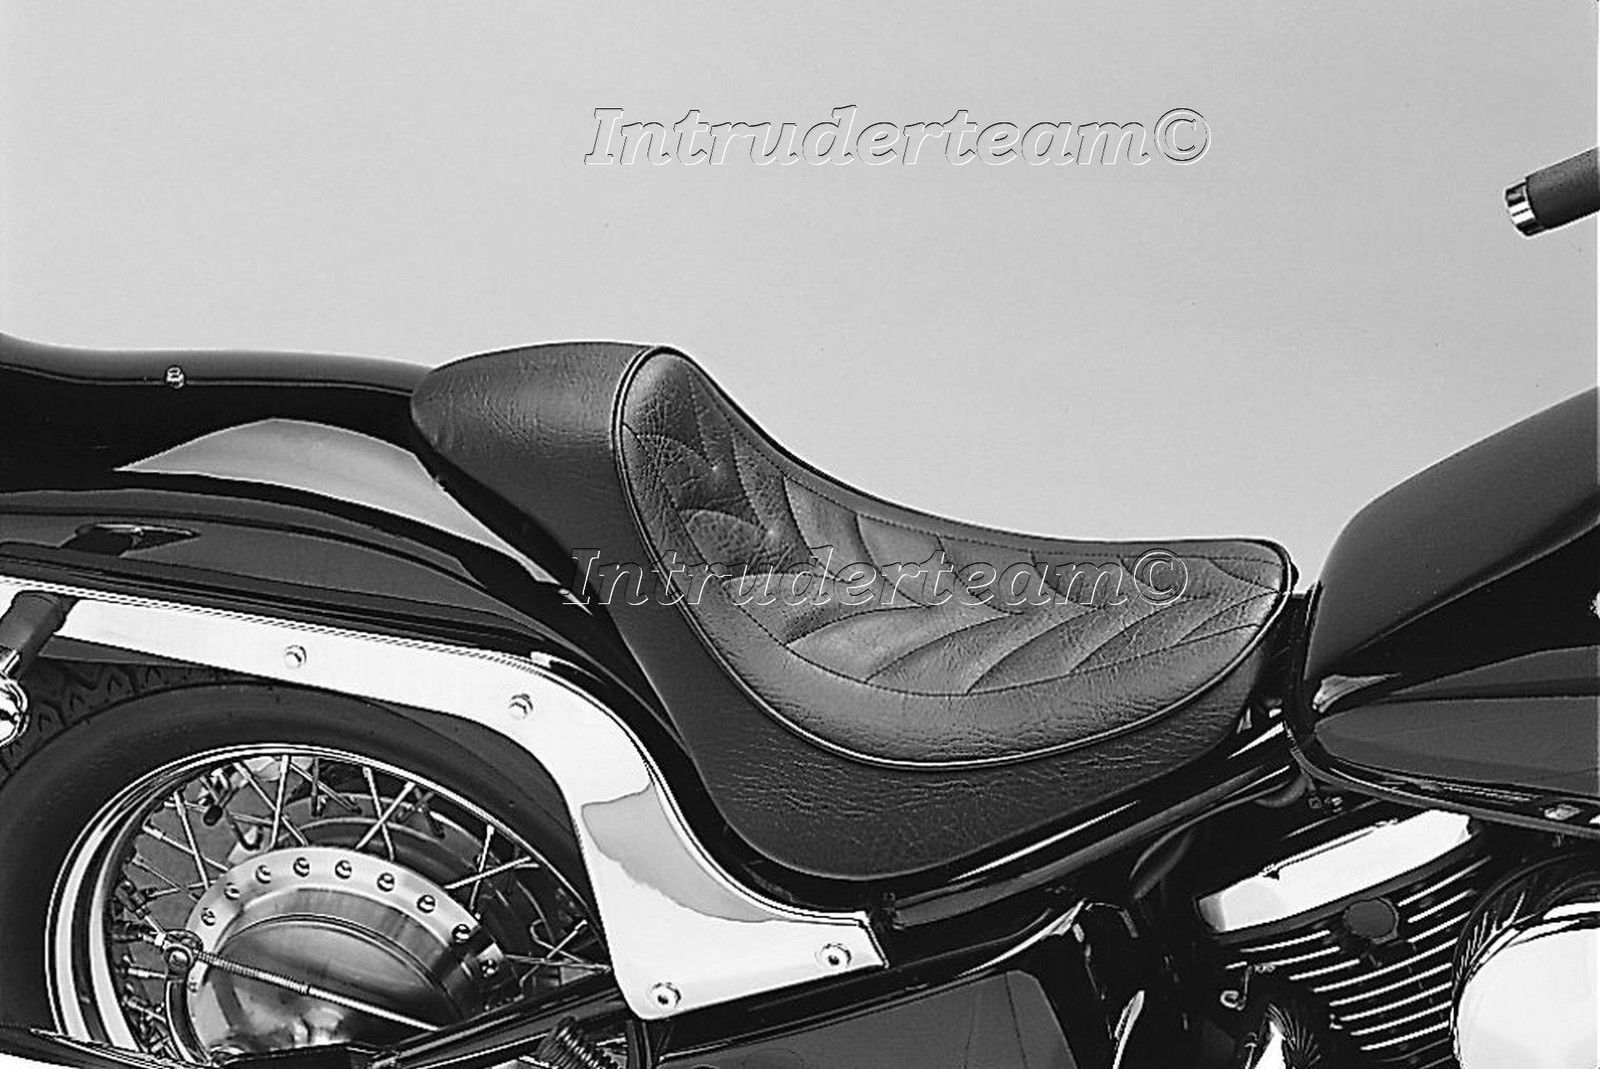 EASY seat Racer Rip solo VN800 VN800 Classic